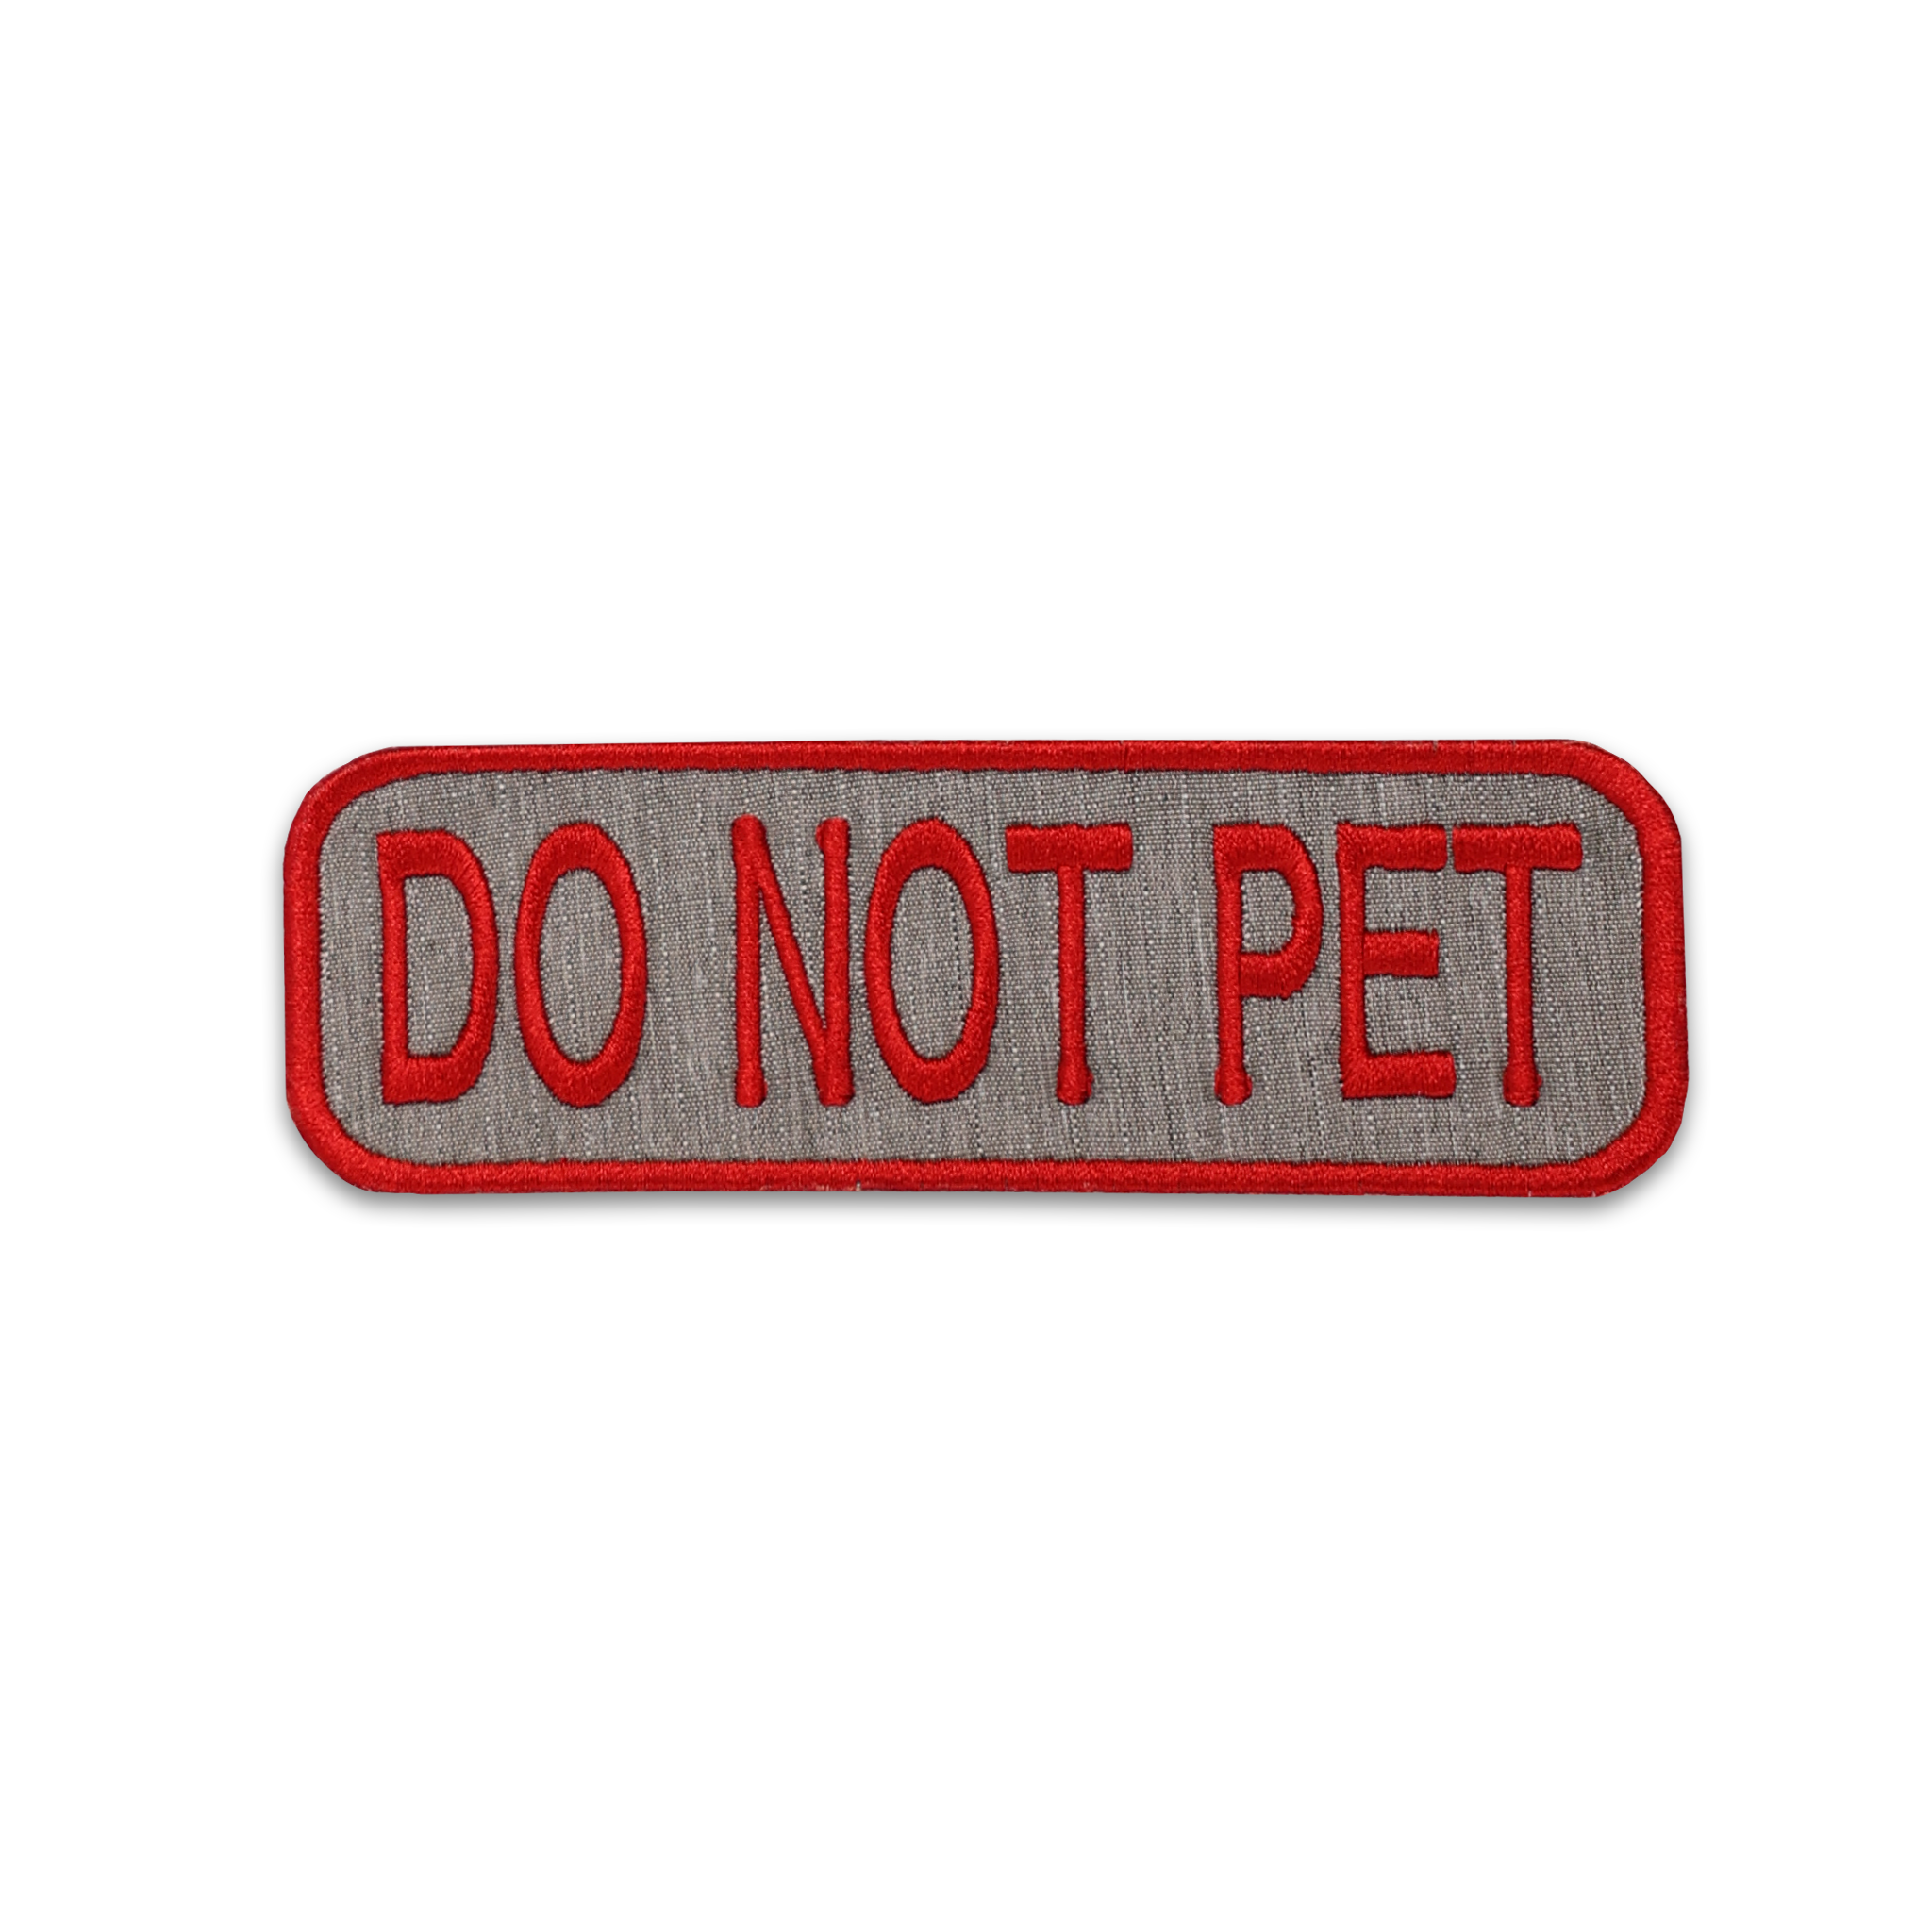 PreMade_DoNotPet_Shopify_29b32e5c-81eb-41a8-92b0-e8b3fc0c38fc.png